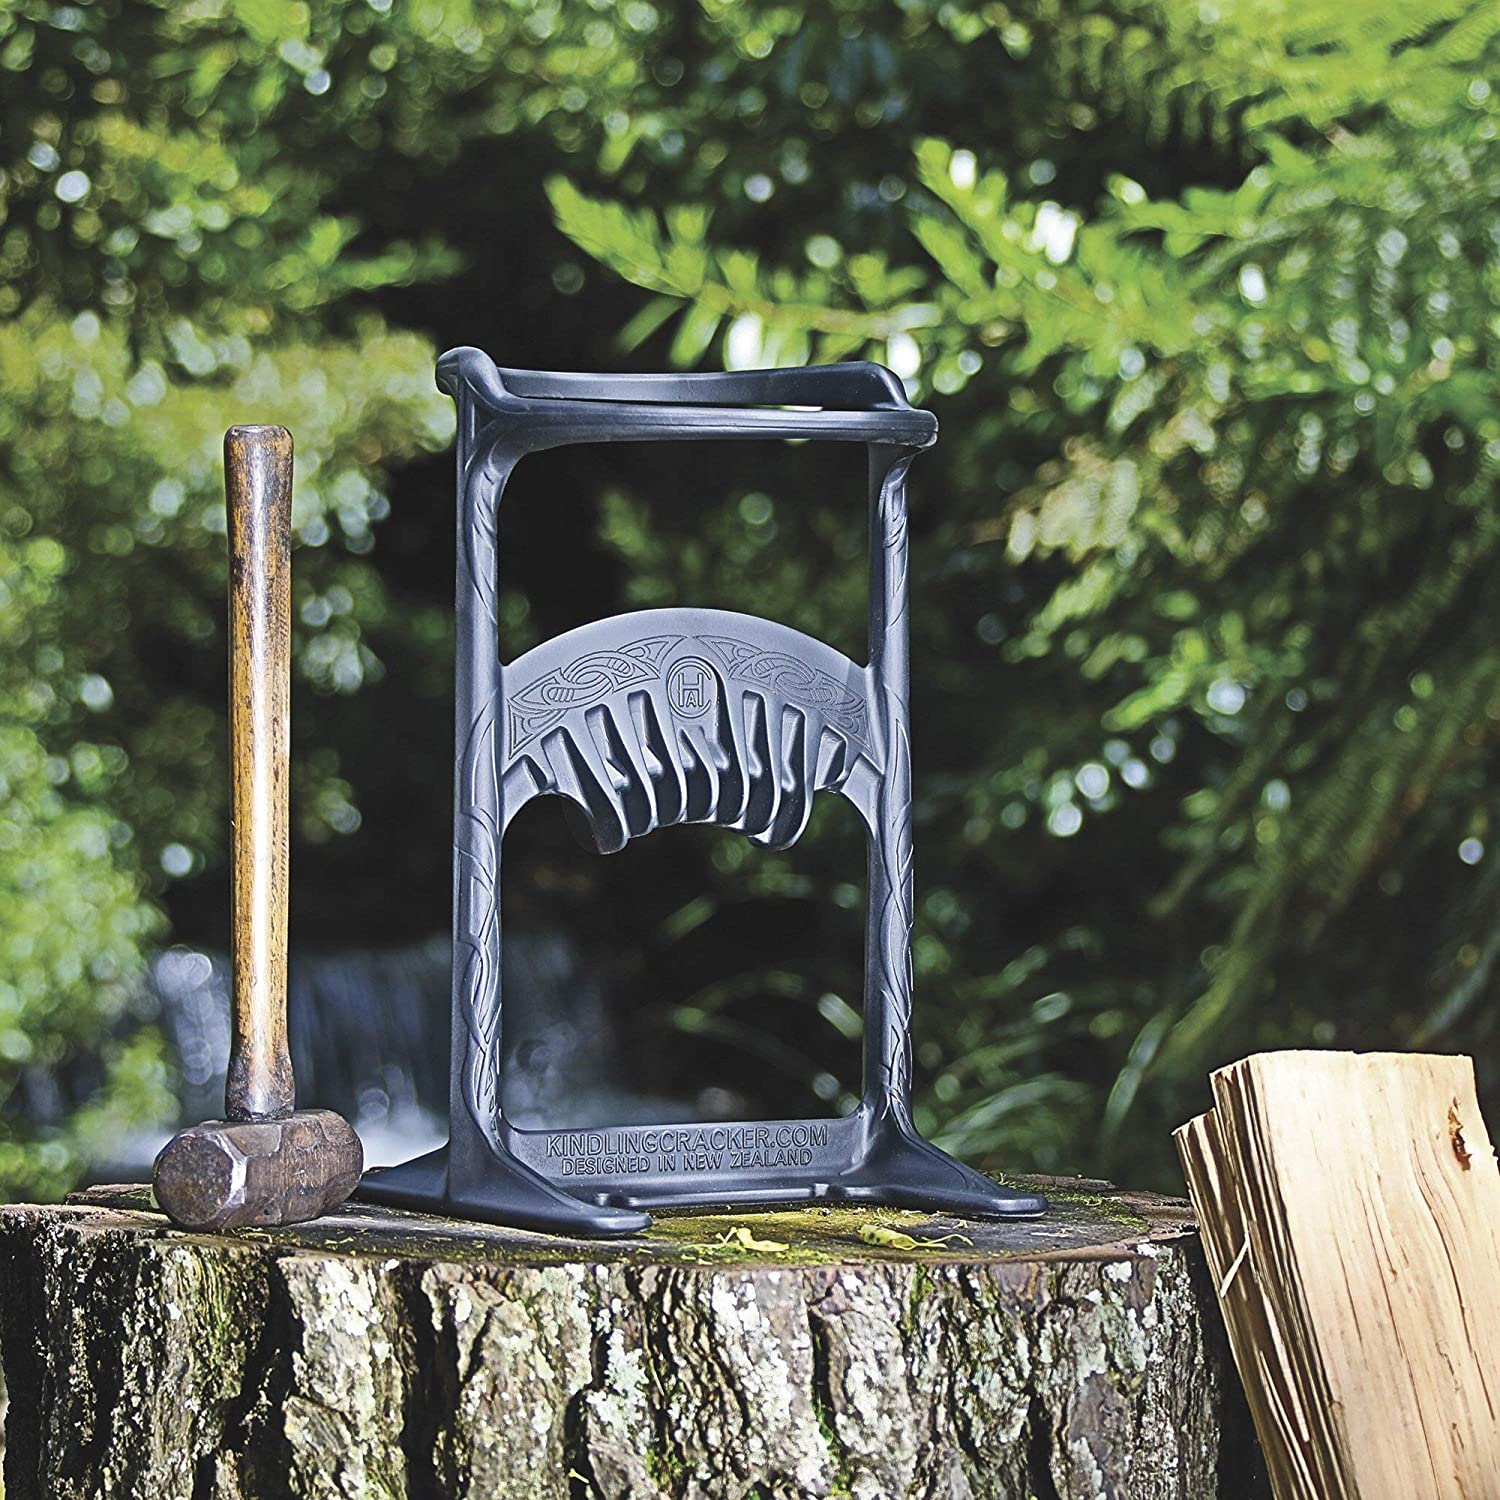 Read more about the article Kindling Cracker – King Firewood Splitter